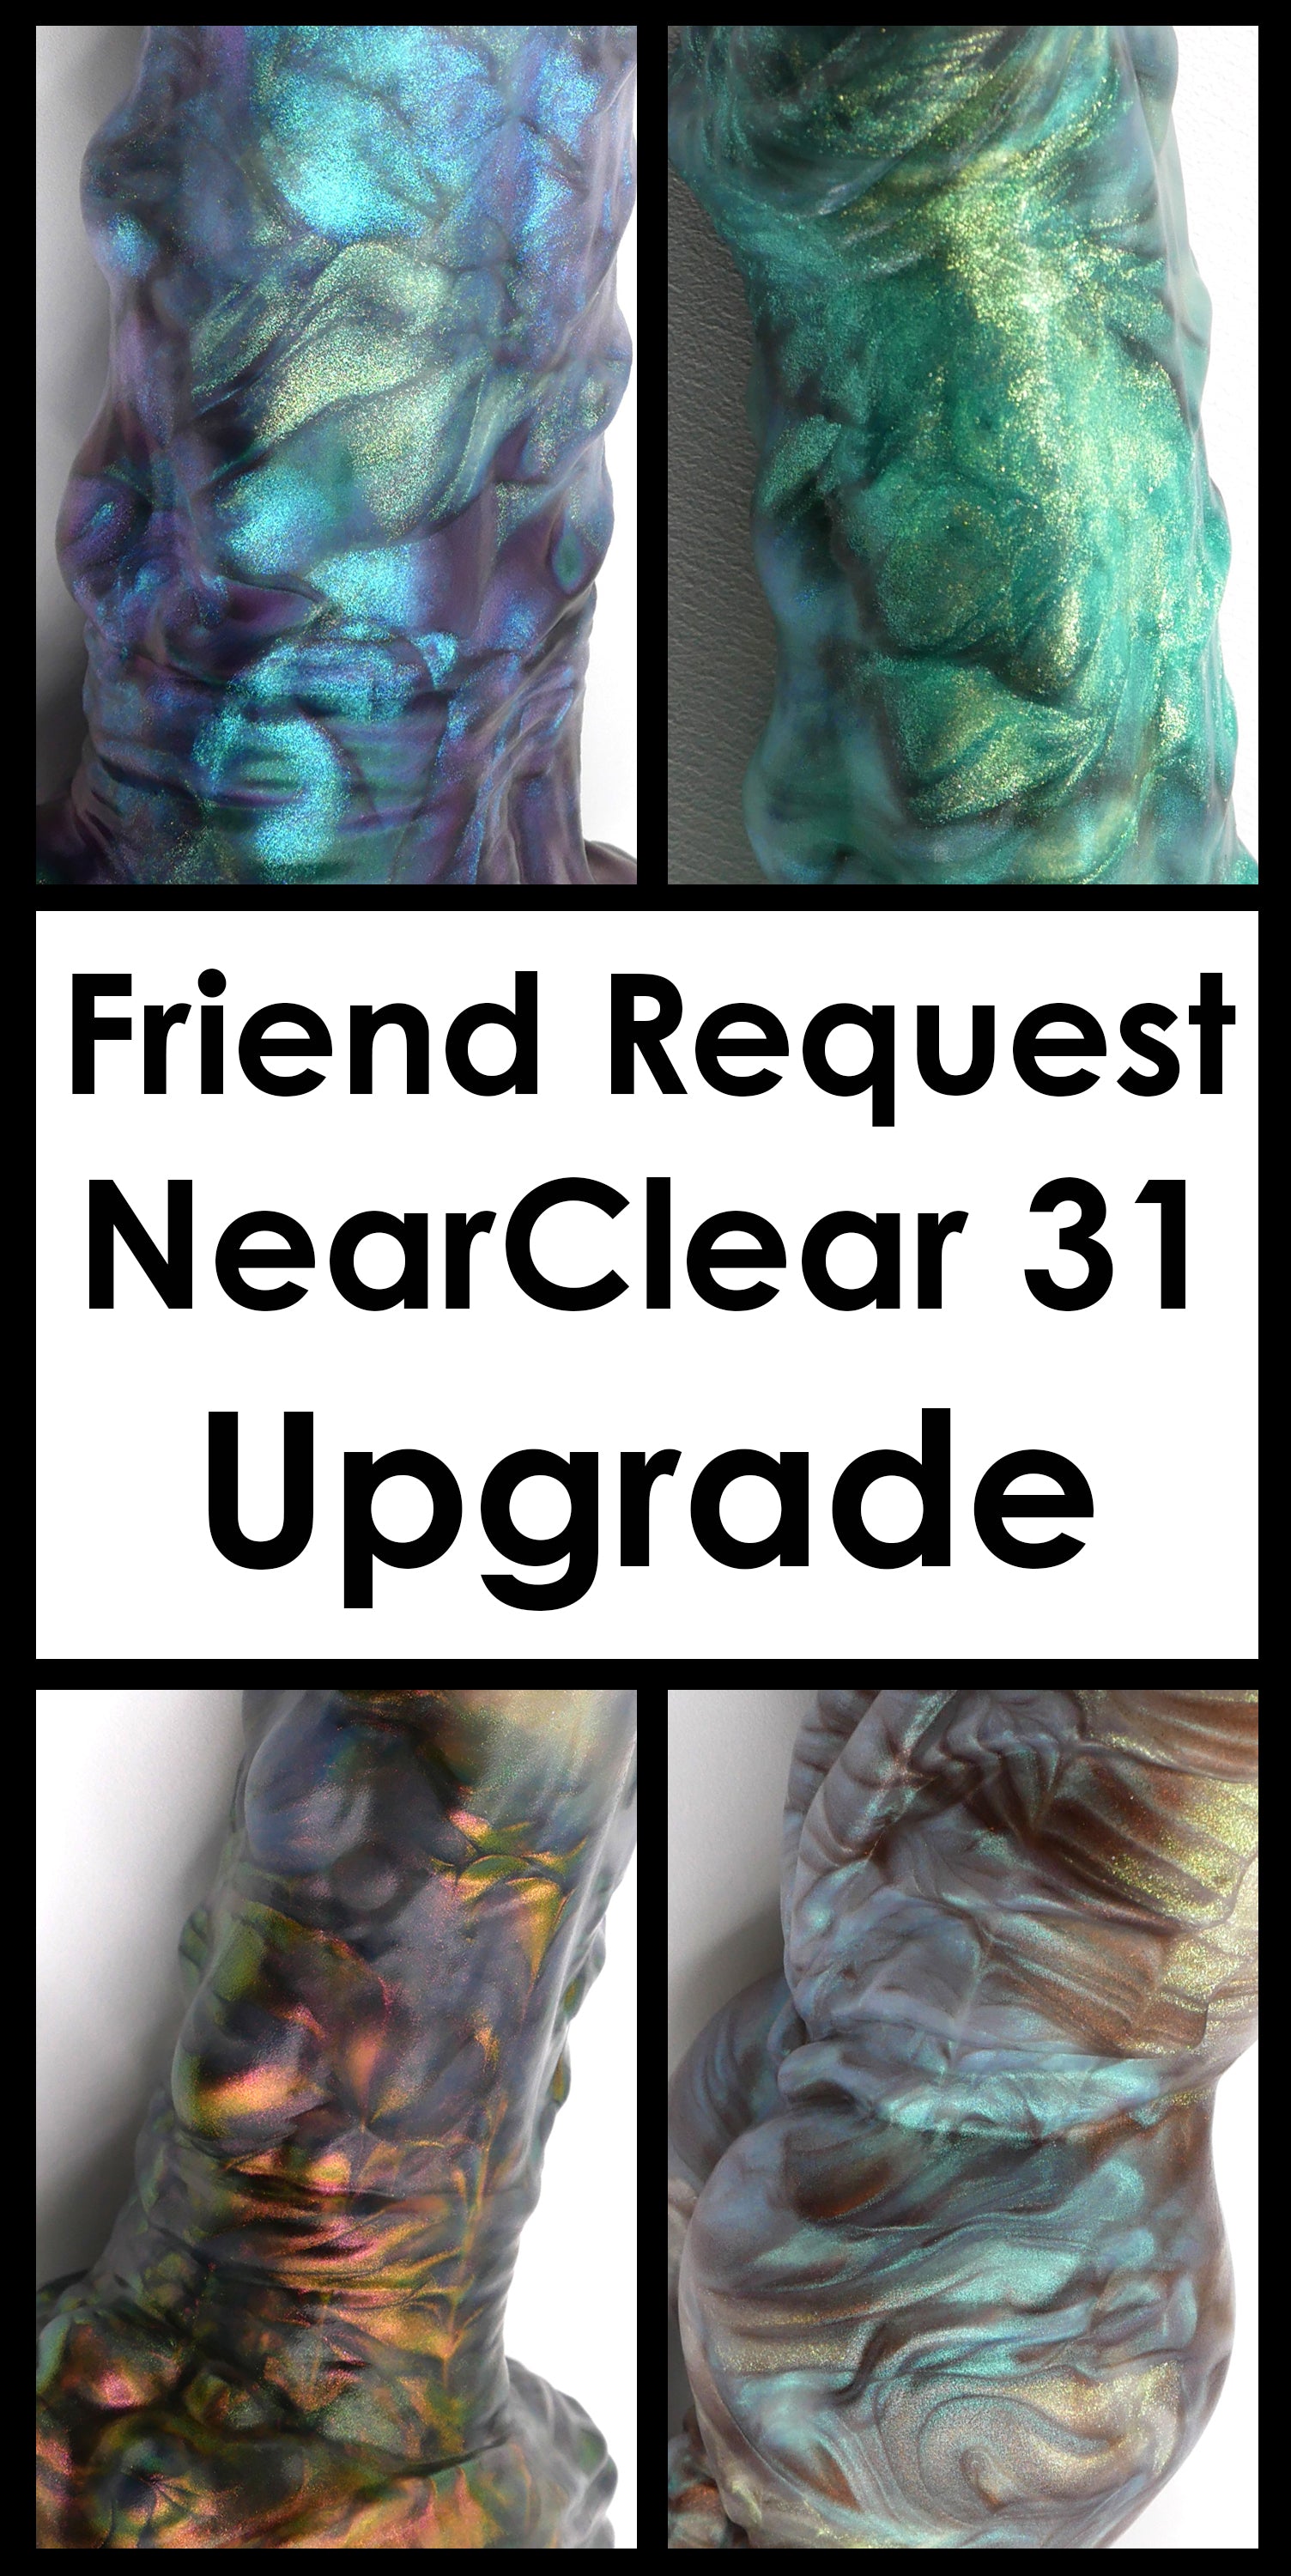 Friend Request Upgrade: NearClear 31 for Void Opal Adjacent Surprise only